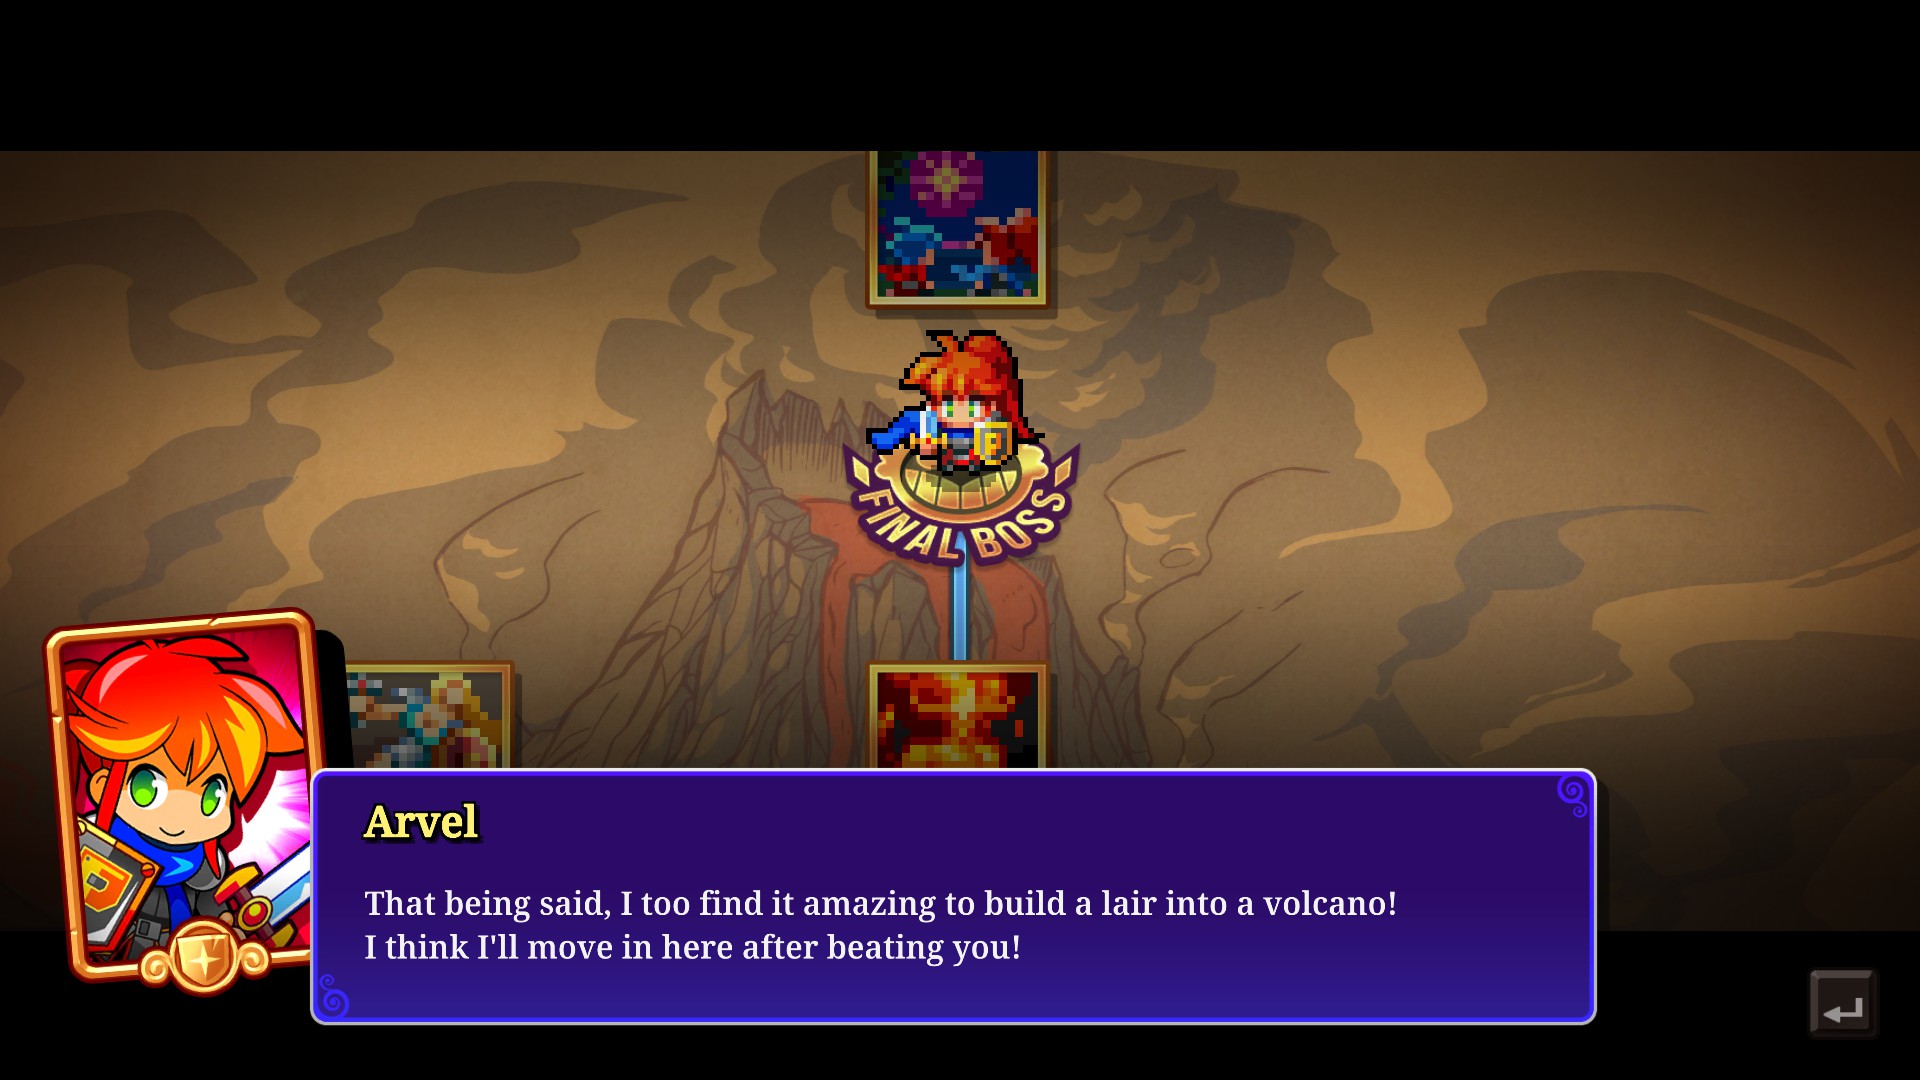 Screenshot from PictoQuest. The player character, Arvel, is at the final boss on the world map. She has a dialogue box that reads: That being said, I too find it amazing to build a lair into a volcano! I think I'll move in here after beating you!